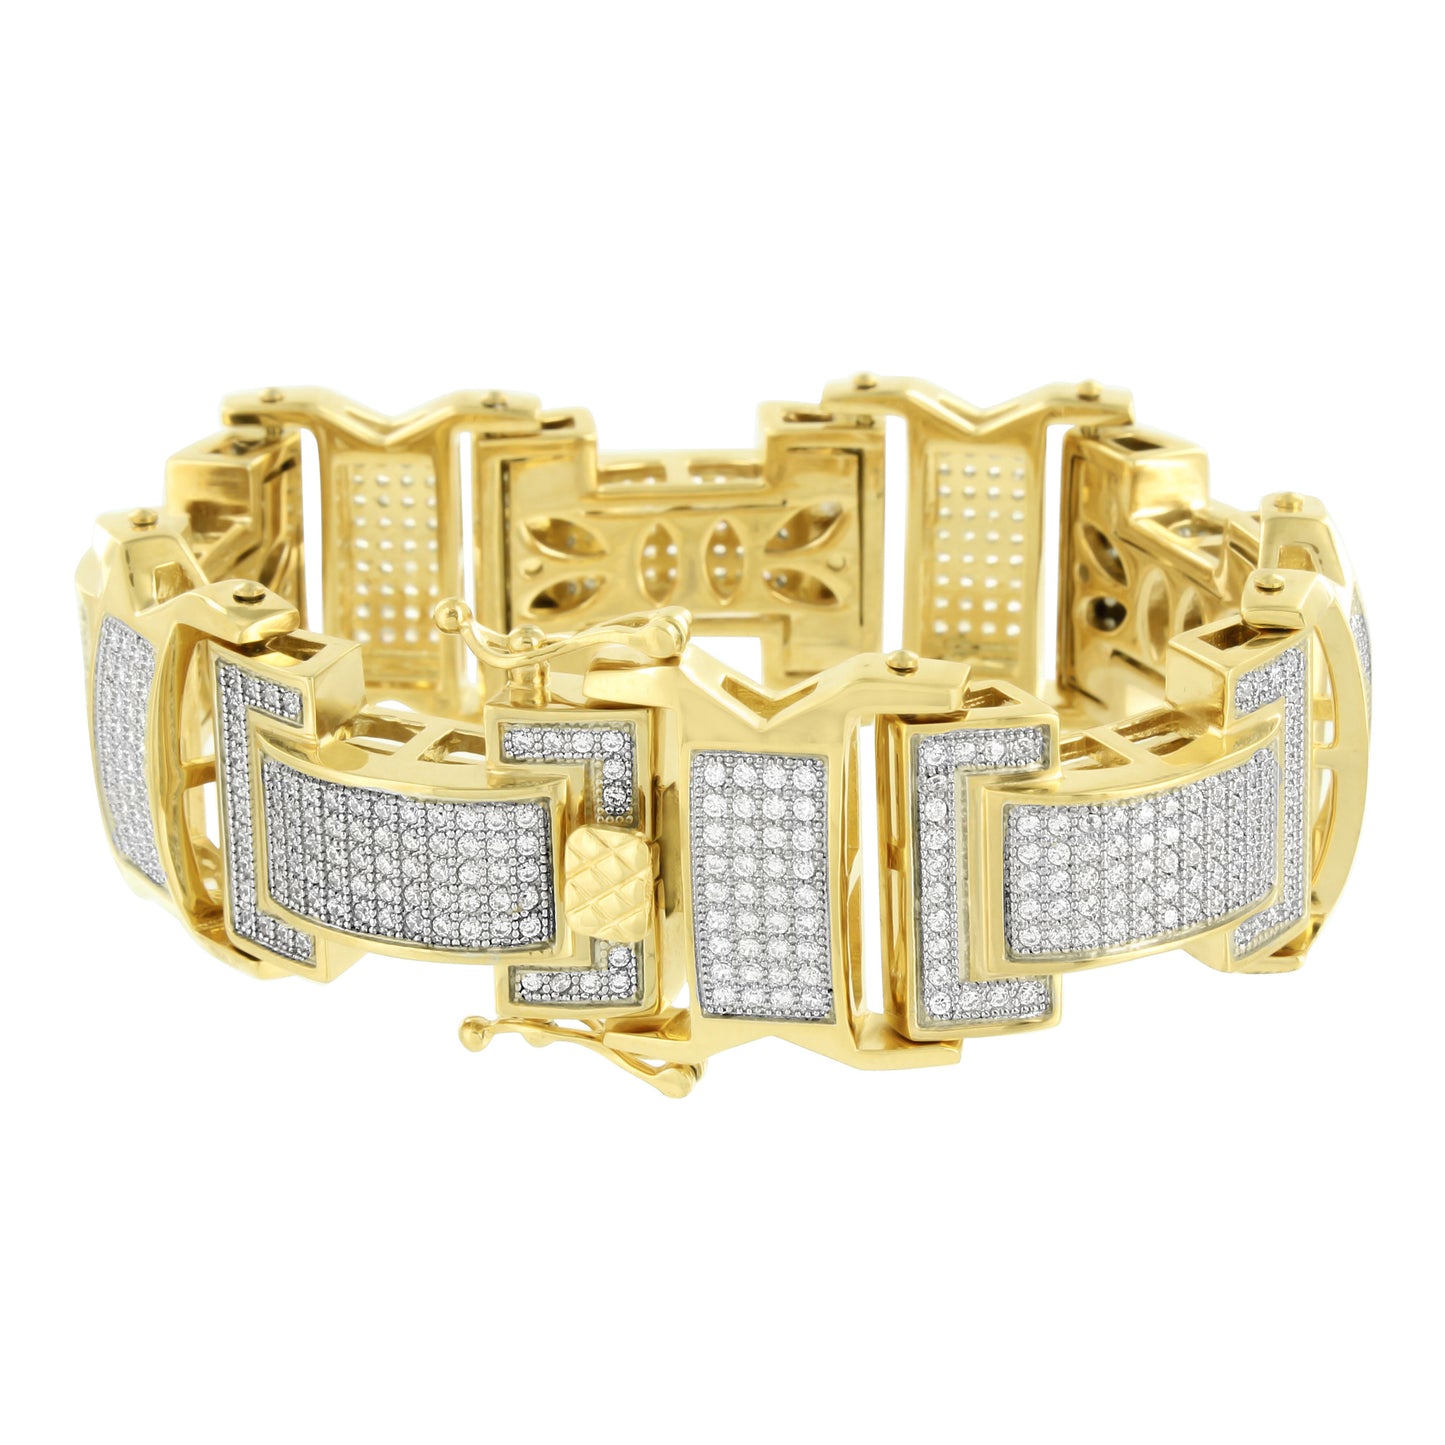 Stainless Steel Bracelet Mens 14K Yellow Gold Finish Lab Diamonds Micro Pave New